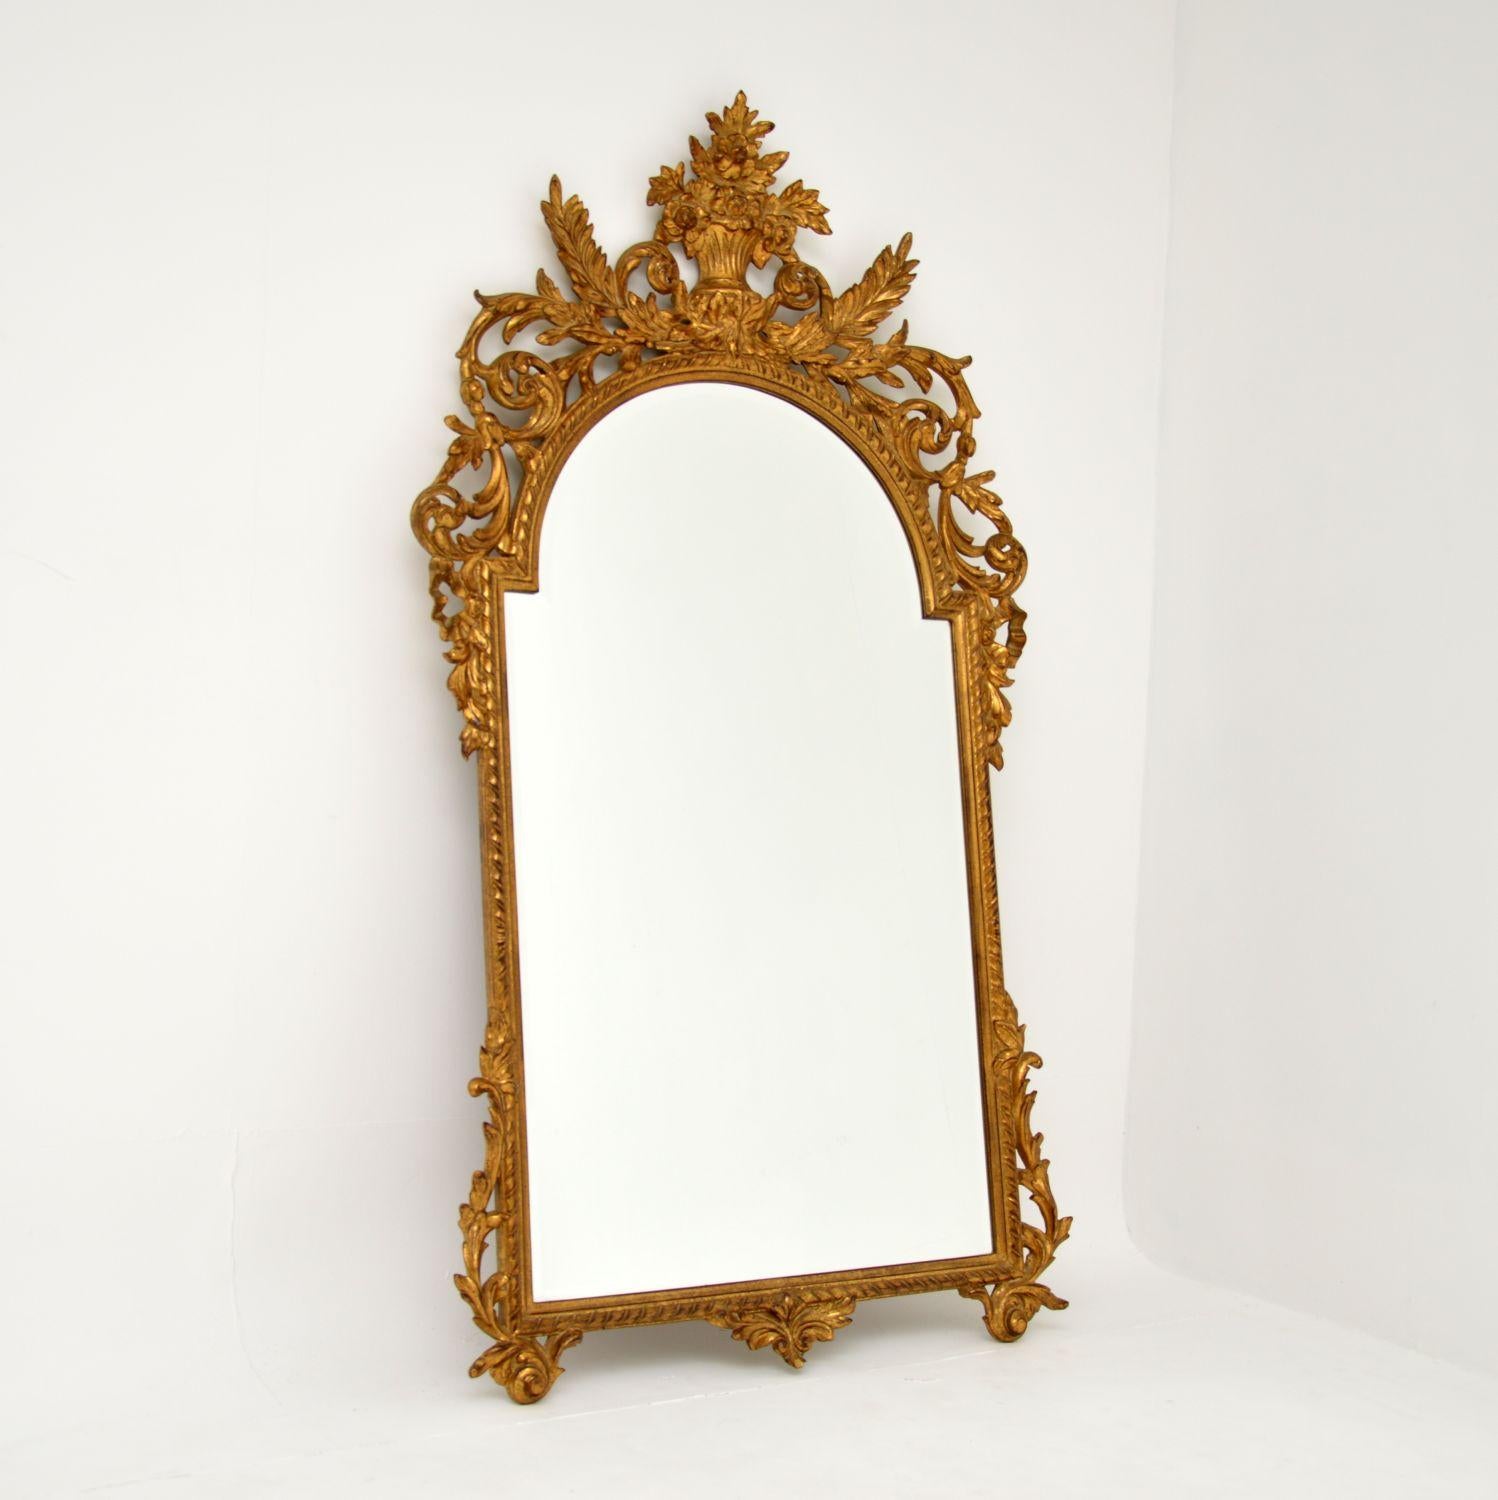 A large and impressive antique carved gilt wood mirror, which I would say is French, dating from around the 1950’s period.

It is beautifully made and has a stunning design. There is intricate floral carving throughout, this is beautifully gilded